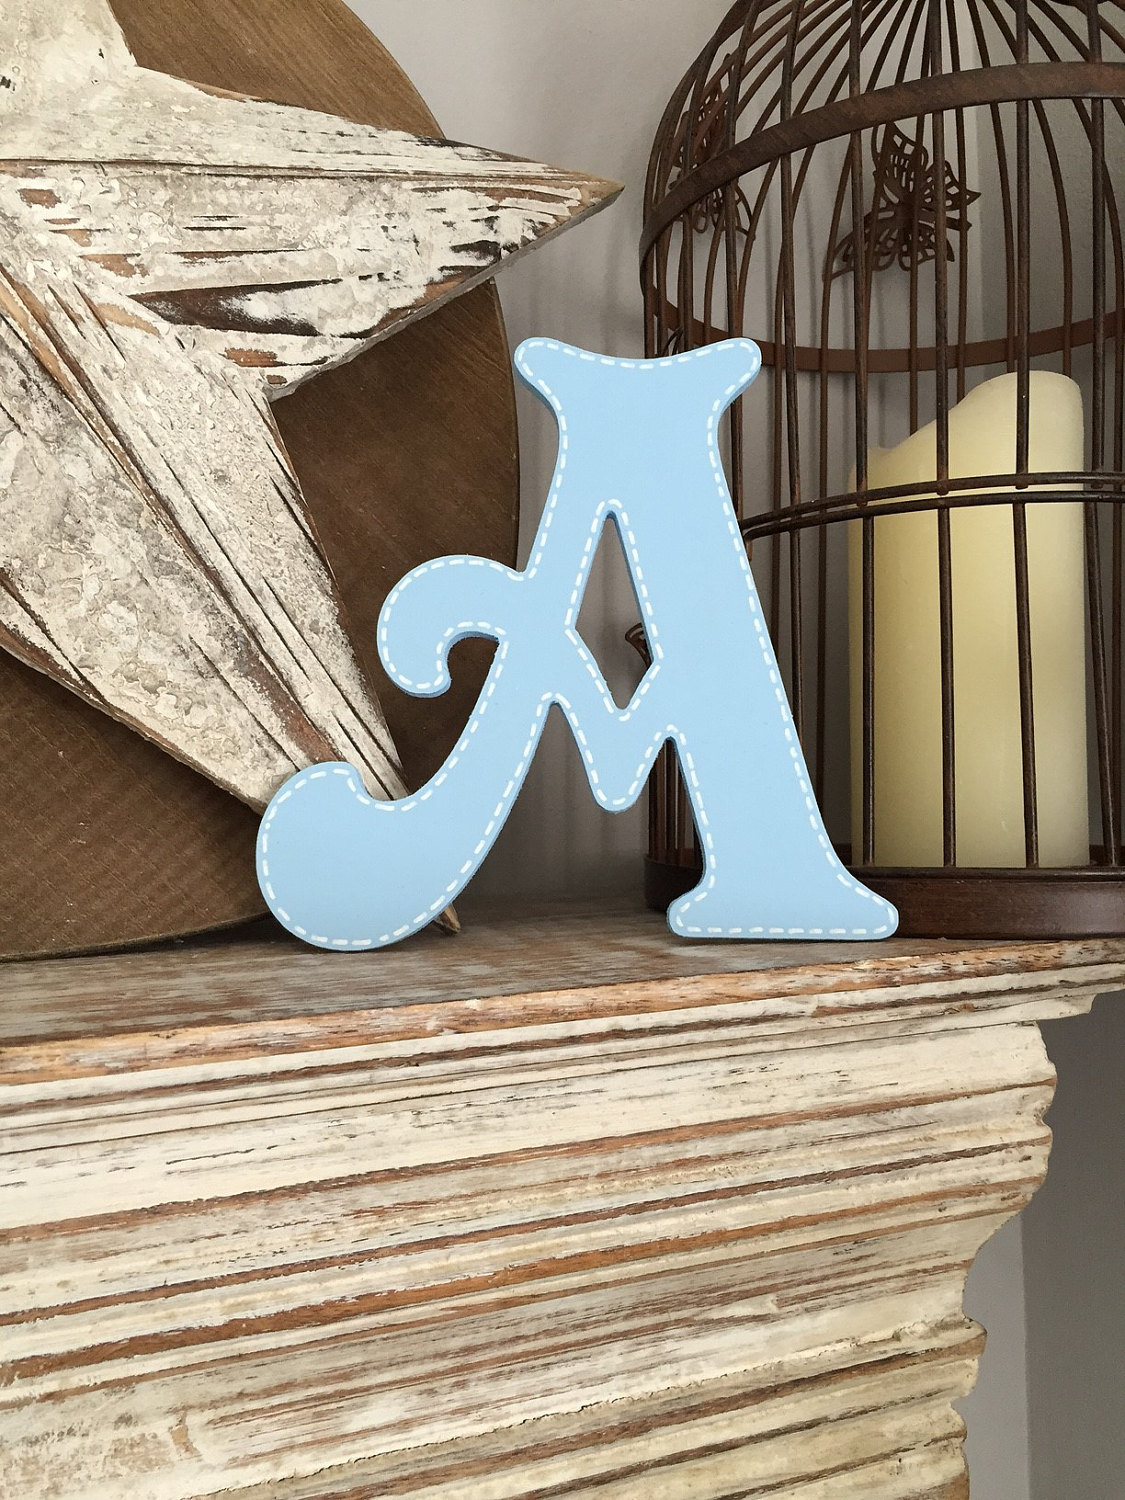 Victorian A with stitched edge - available as wall letter and standing letter